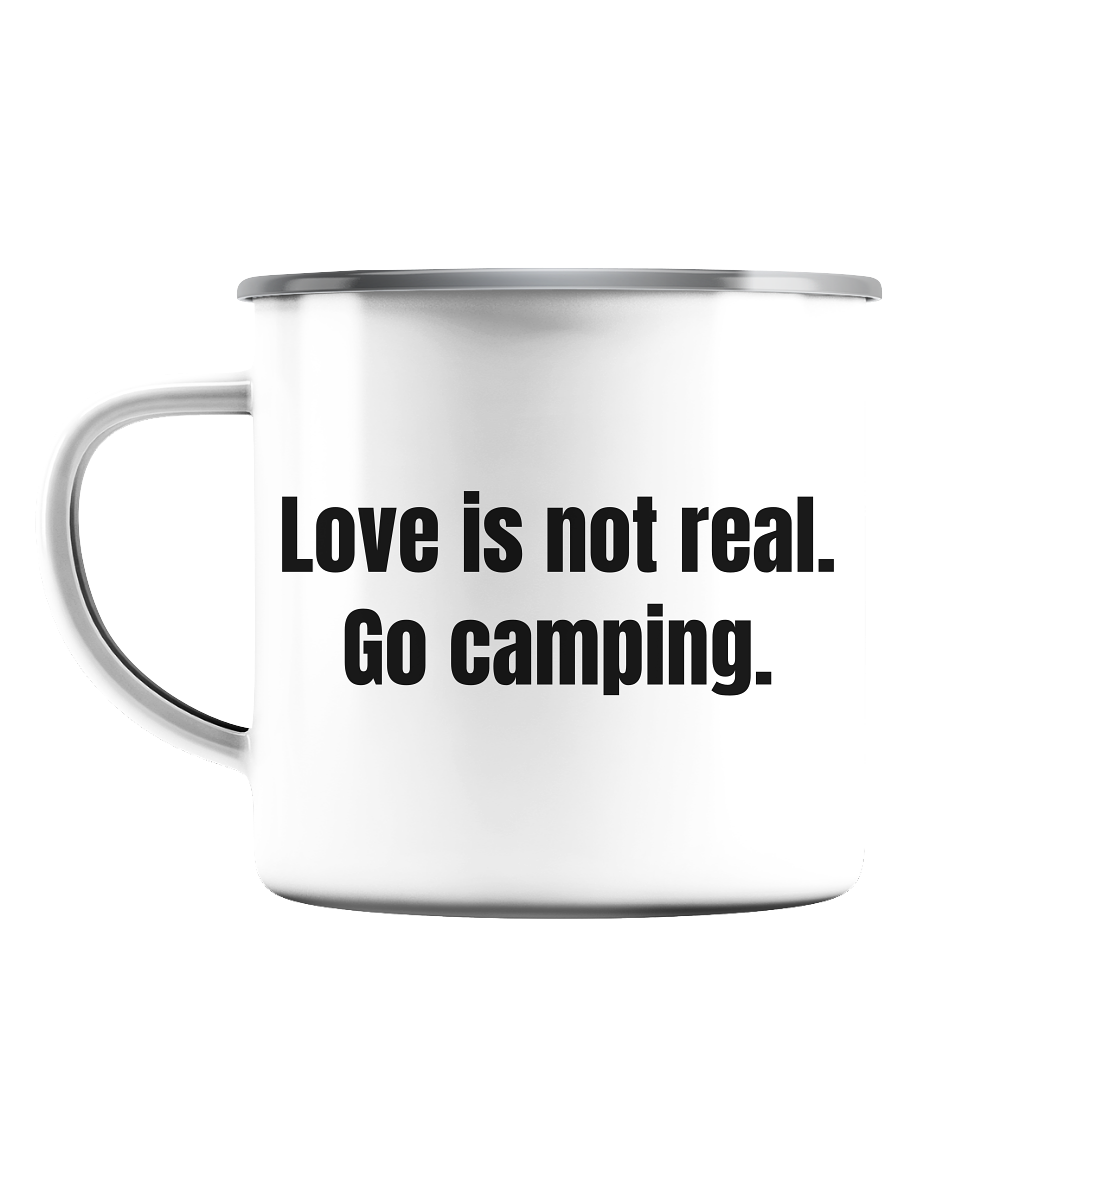 Love is not real. Go camping. - Emaille Tasse (Silber)